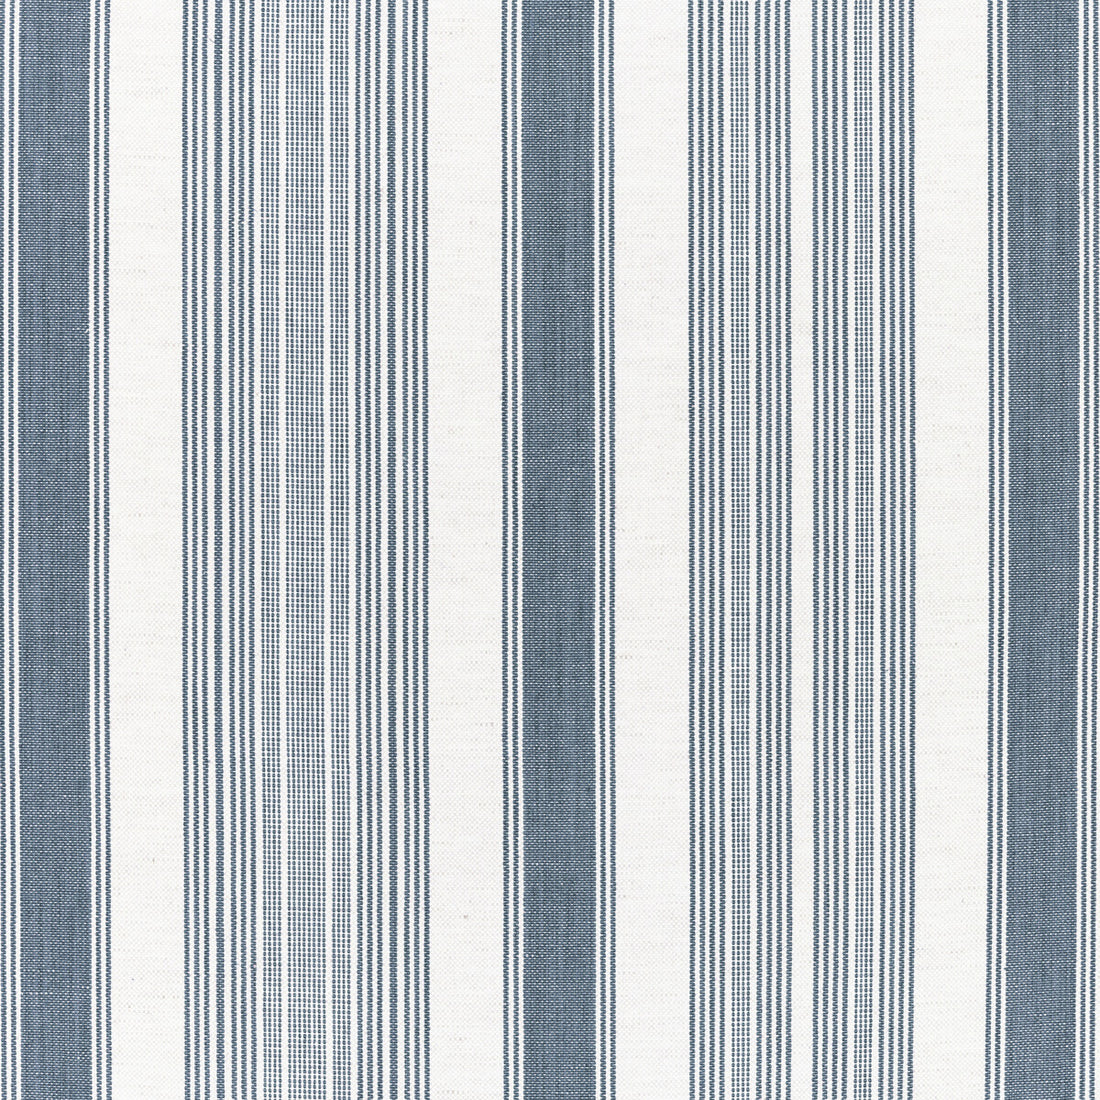 Tablada Stripe fabric in blue color - pattern 2021102.505.0 - by Lee Jofa in the Triana Weaves collection